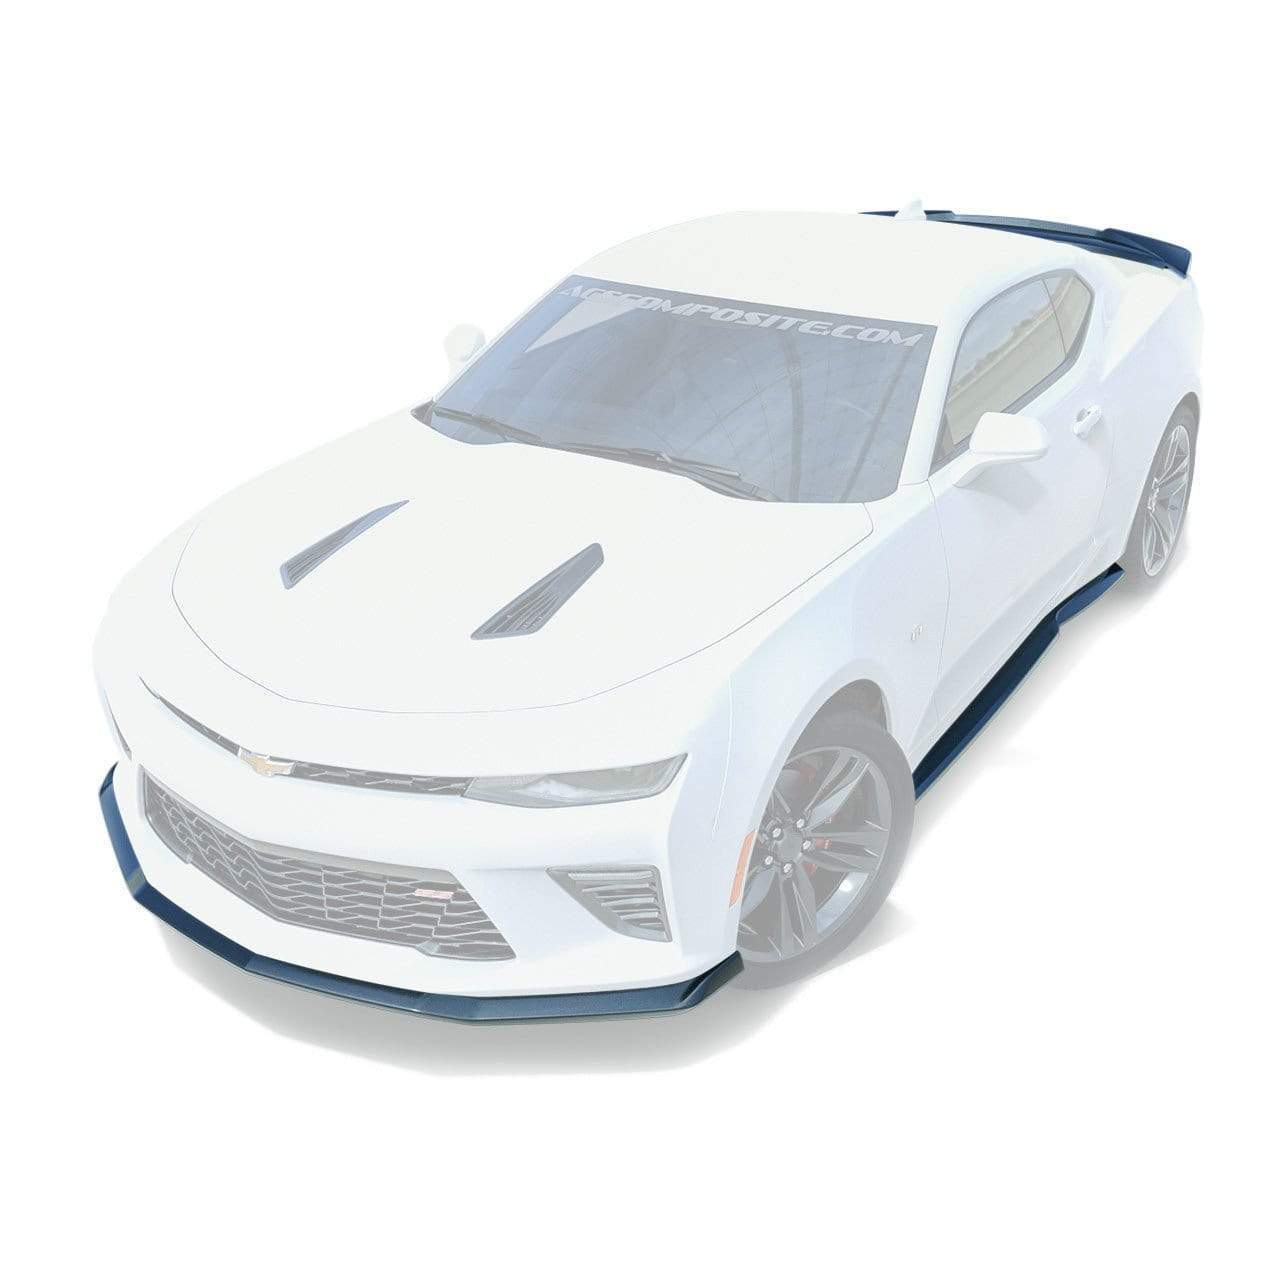 ACS Camaro SS Aeropack with Primer finish, T6 Splitter, Side Rockers, and No Rear Spoiler [48-4-001|48-4-003|48-4-005|48-4-013]GBA.